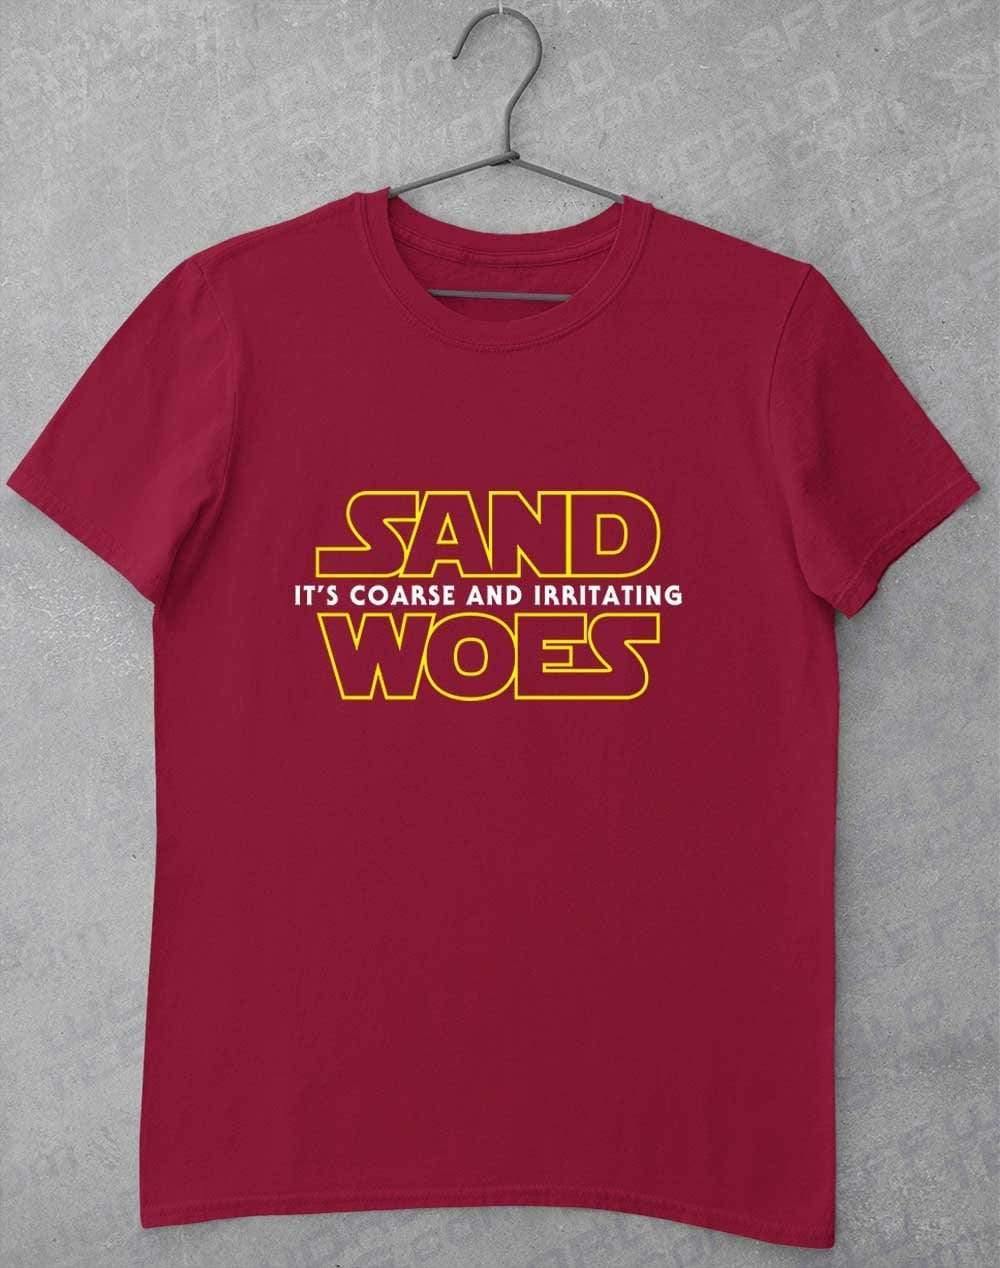 Sand Woes - T-Shirt S / Cardinal Red  - Off World Tees